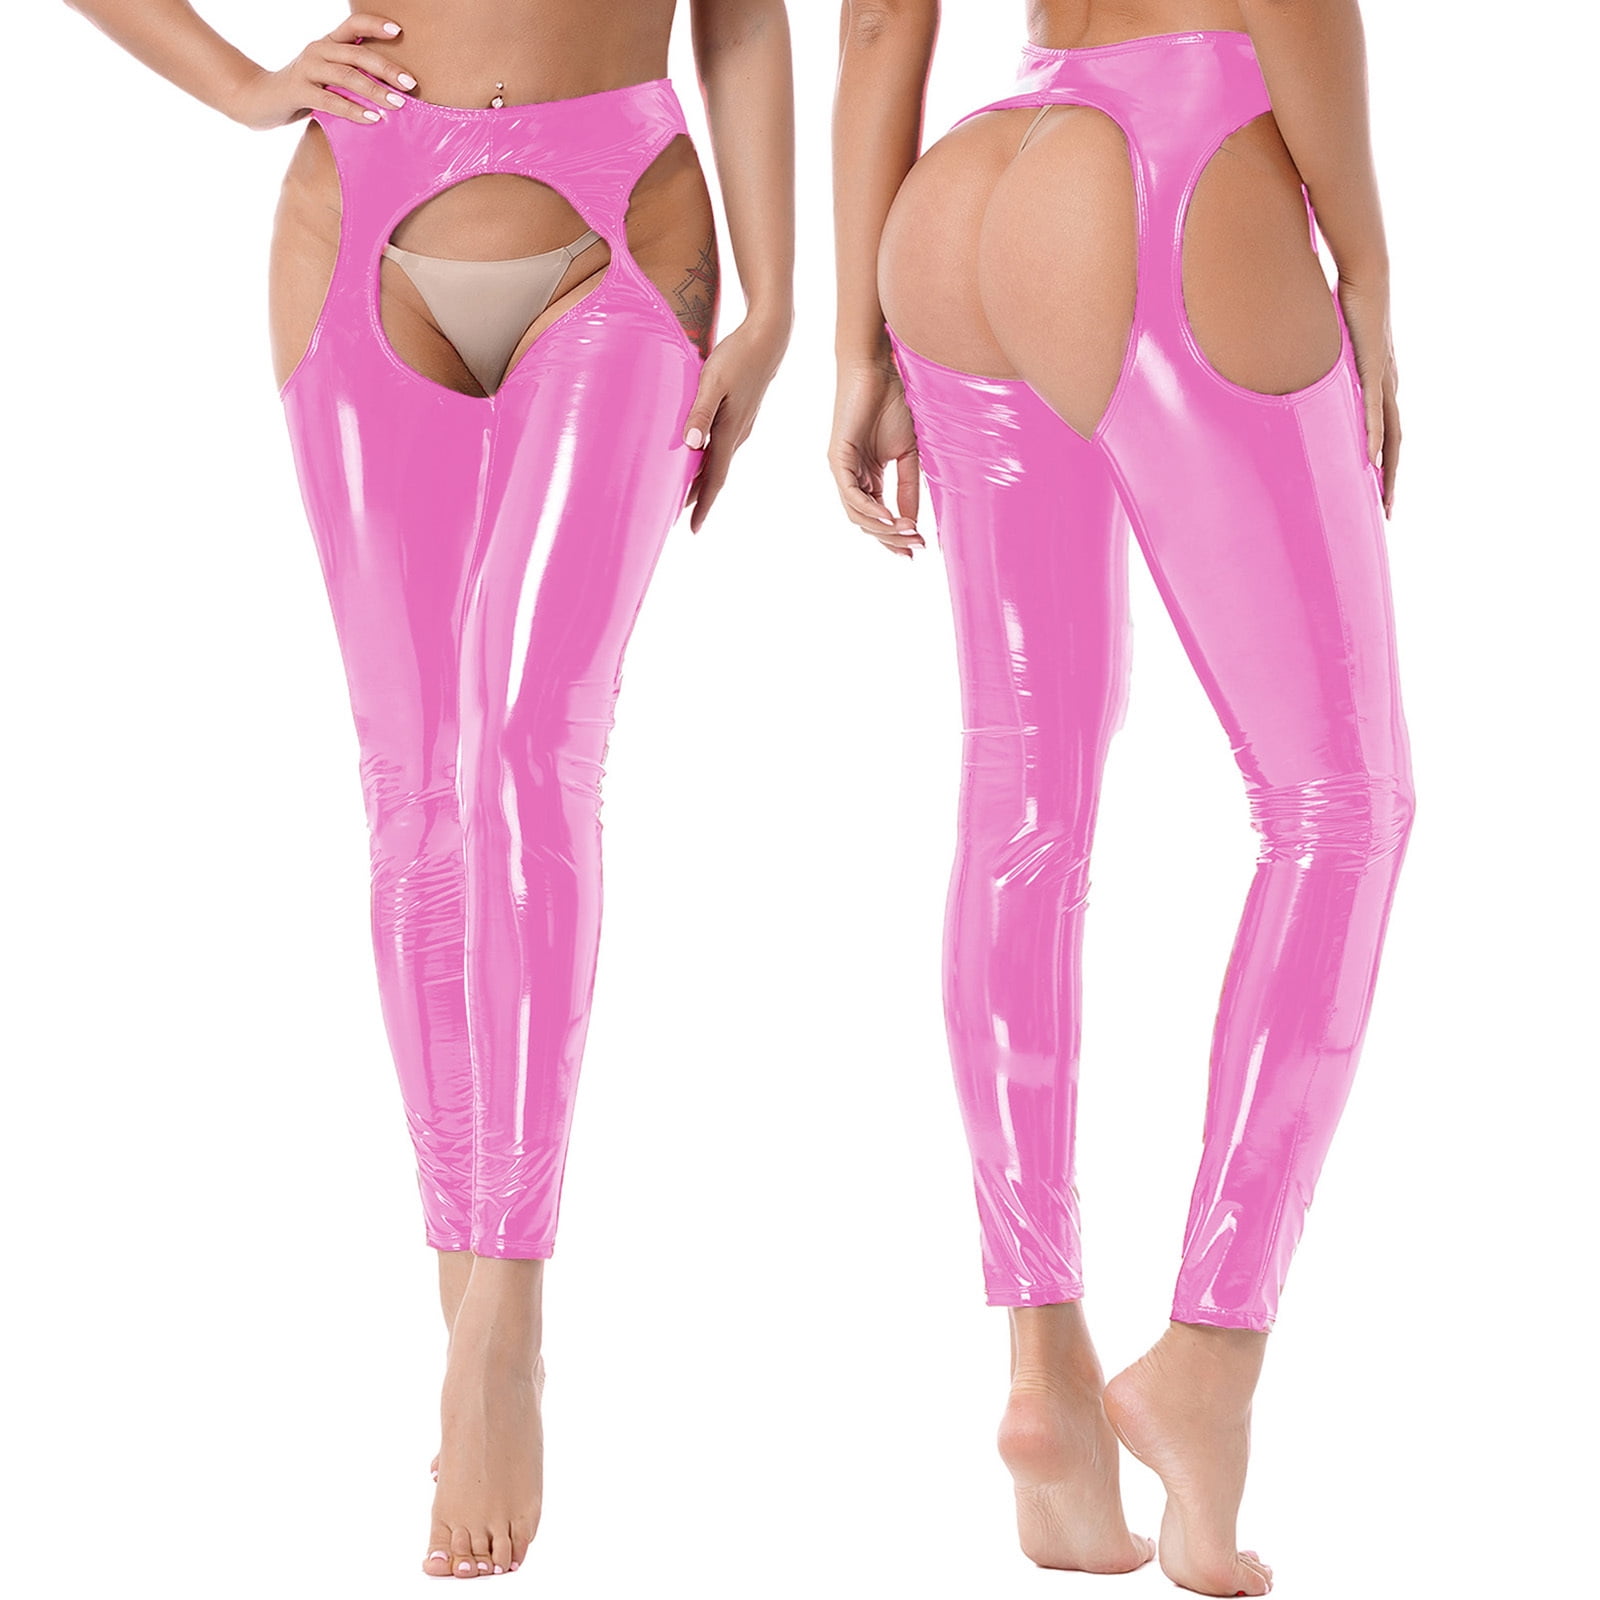 YONGHS Women's Patent Leather Hollowing Out Bottoms Leggings Long Assless Chaps  Pants Pink XL 